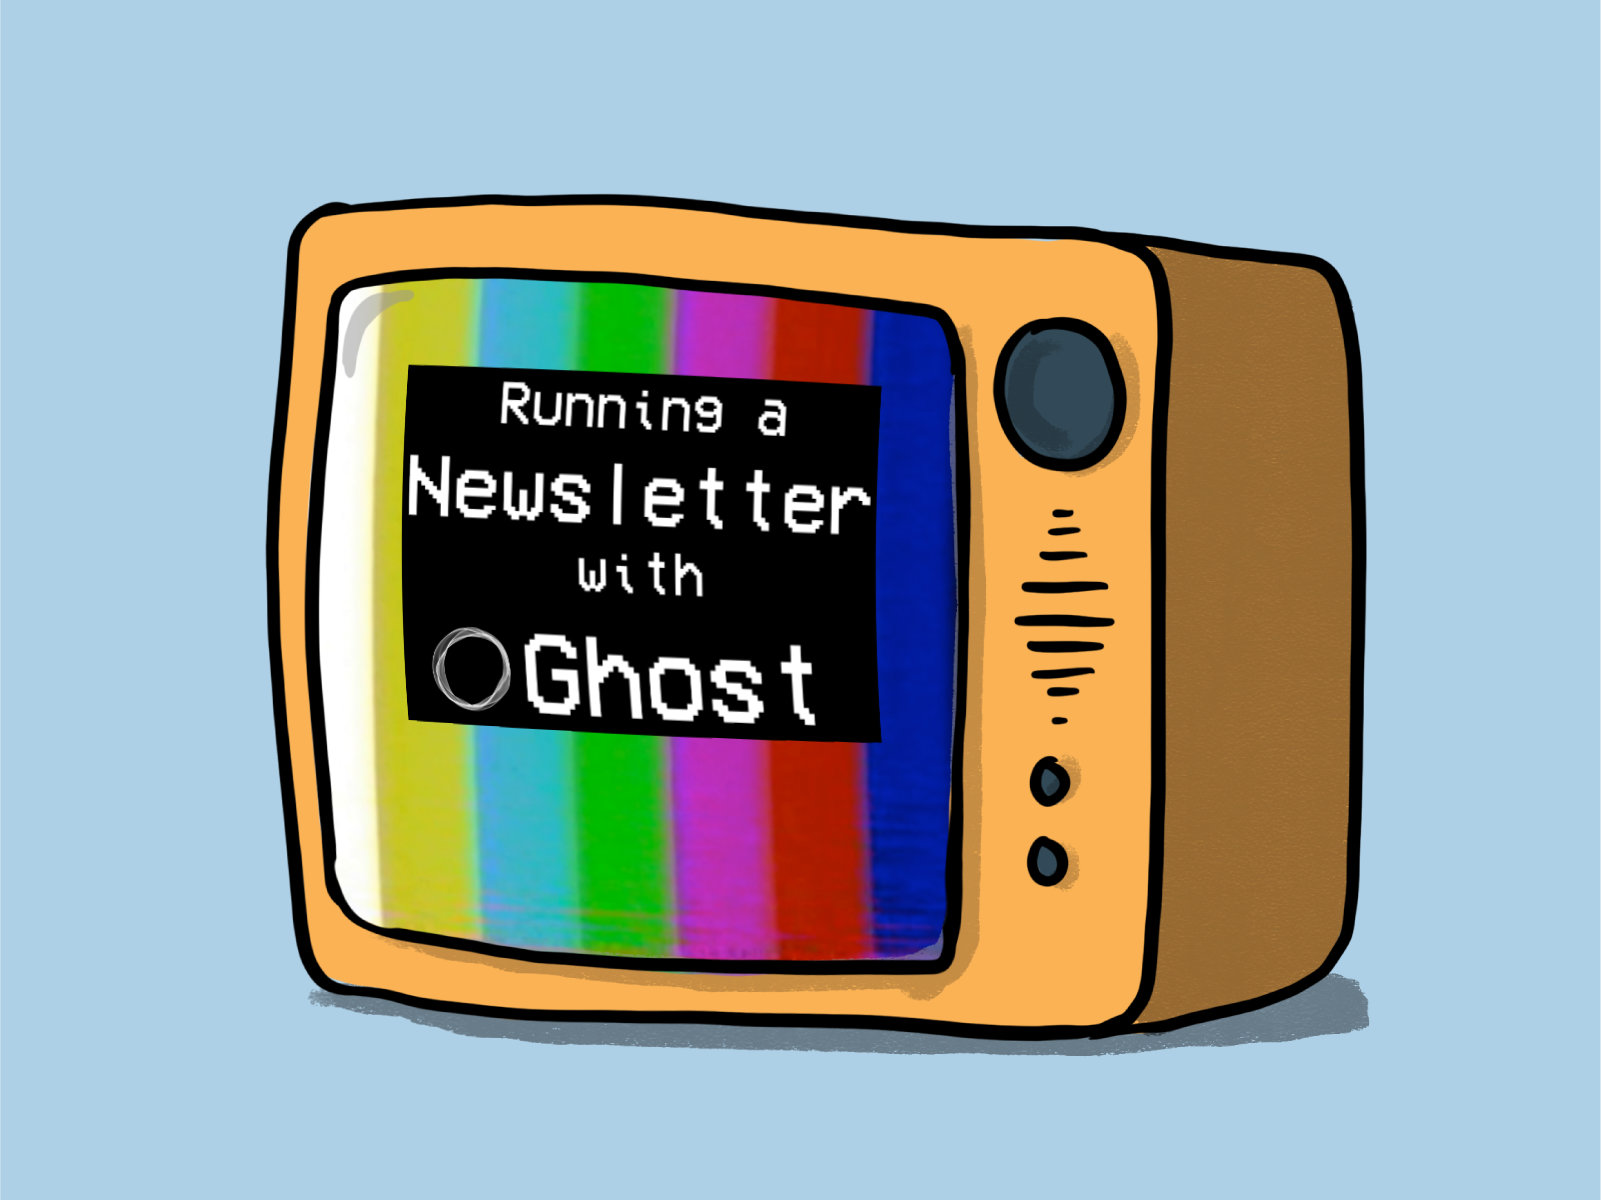 Welcome to Newsletters with Ghost!